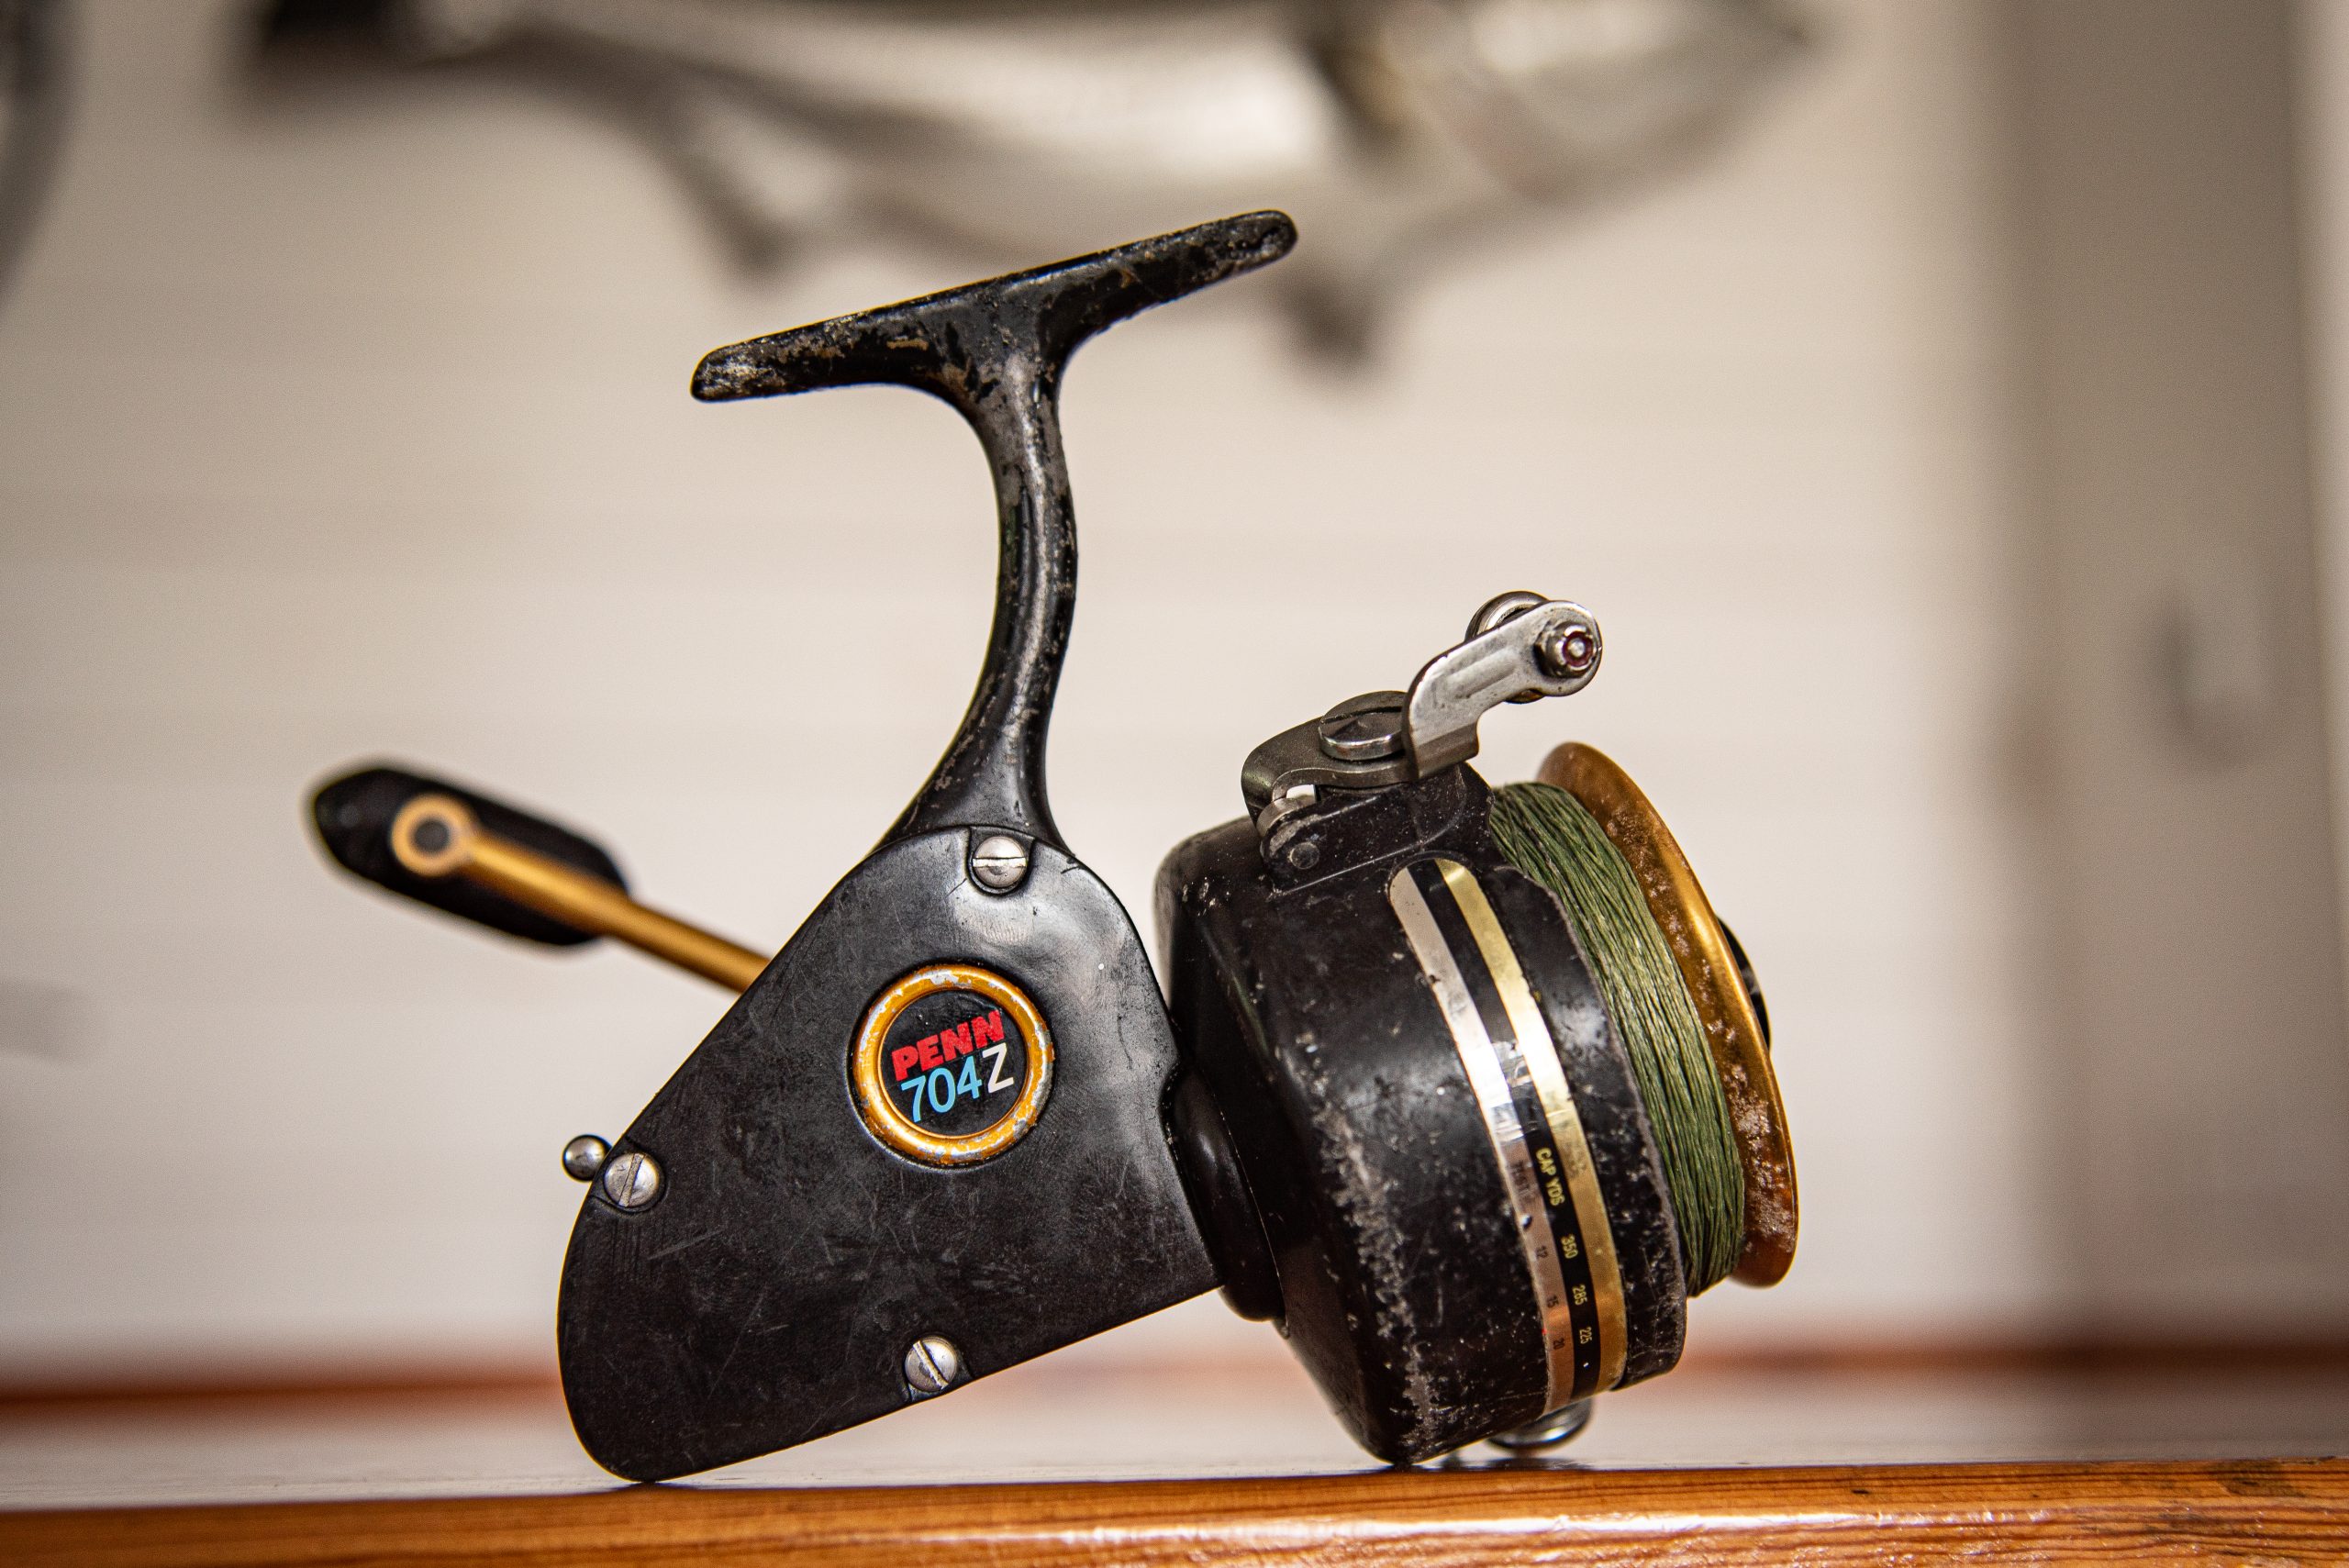 brand new Penn spinning fishing reels - sporting goods - by owner